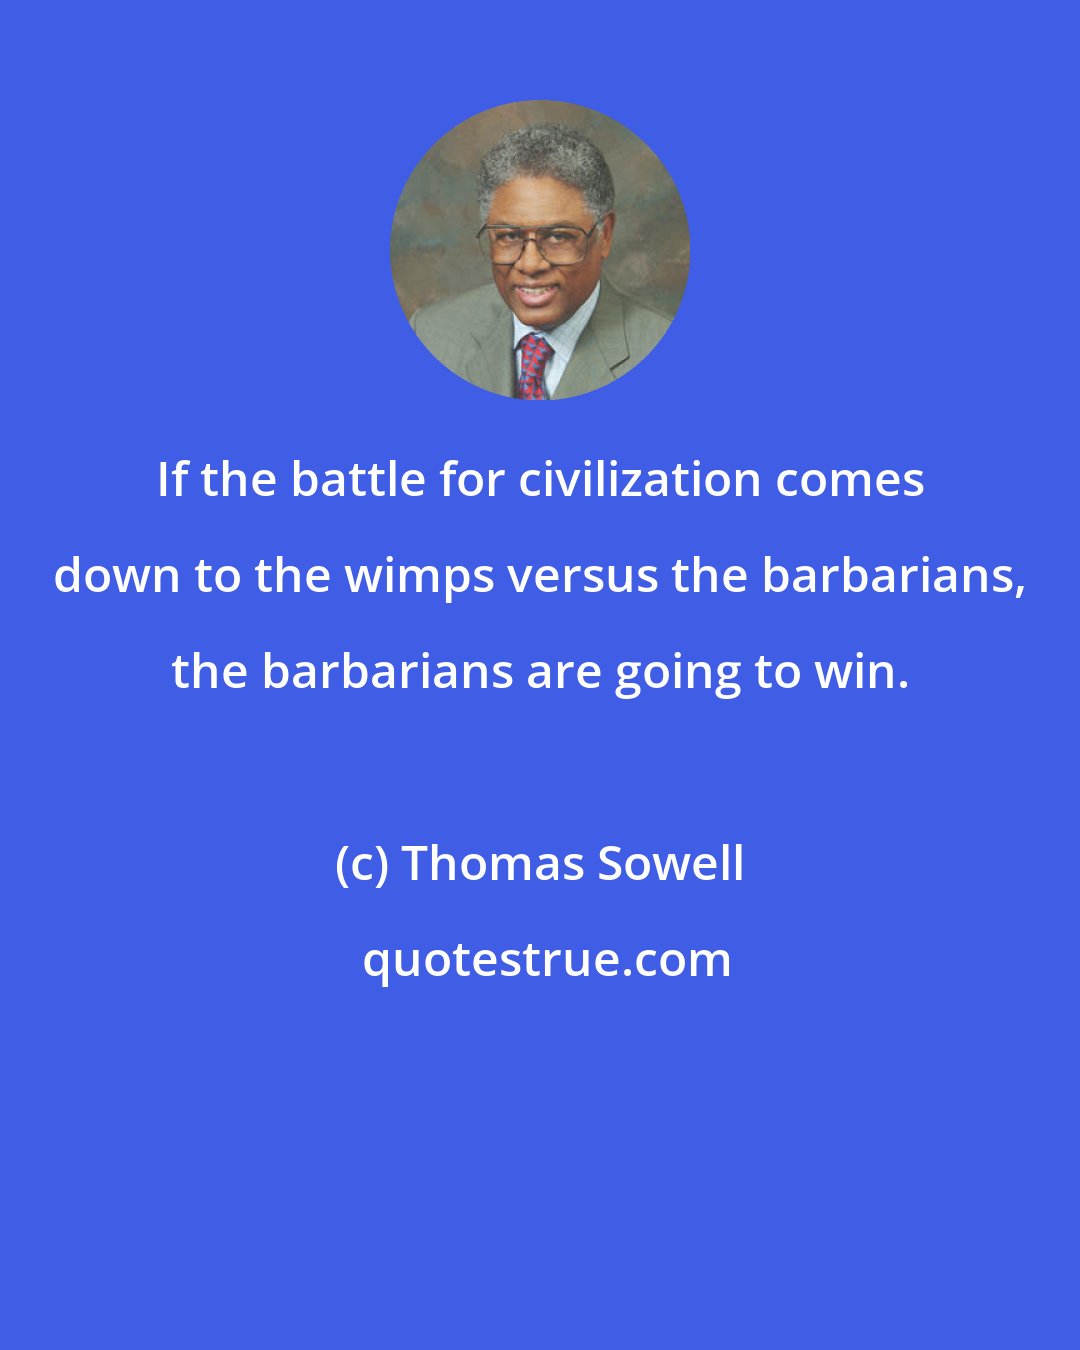 Thomas Sowell: If the battle for civilization comes down to the wimps versus the barbarians, the barbarians are going to win.